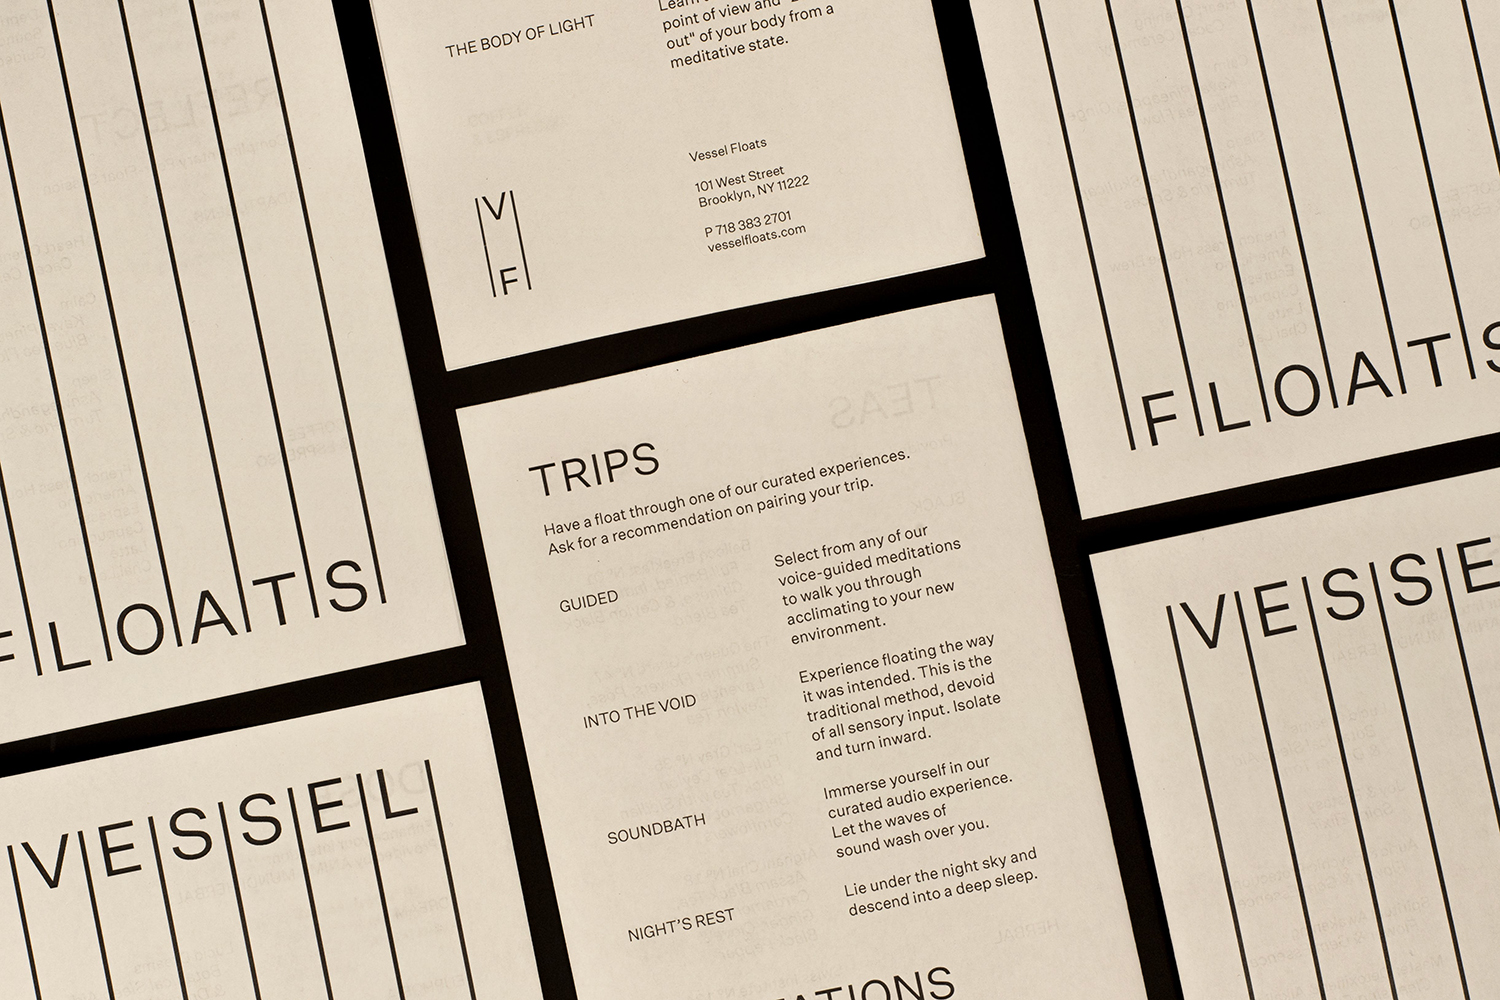 Brand identity and menus designed by Order for flotation and deprivation therapy spa Vessel Floats